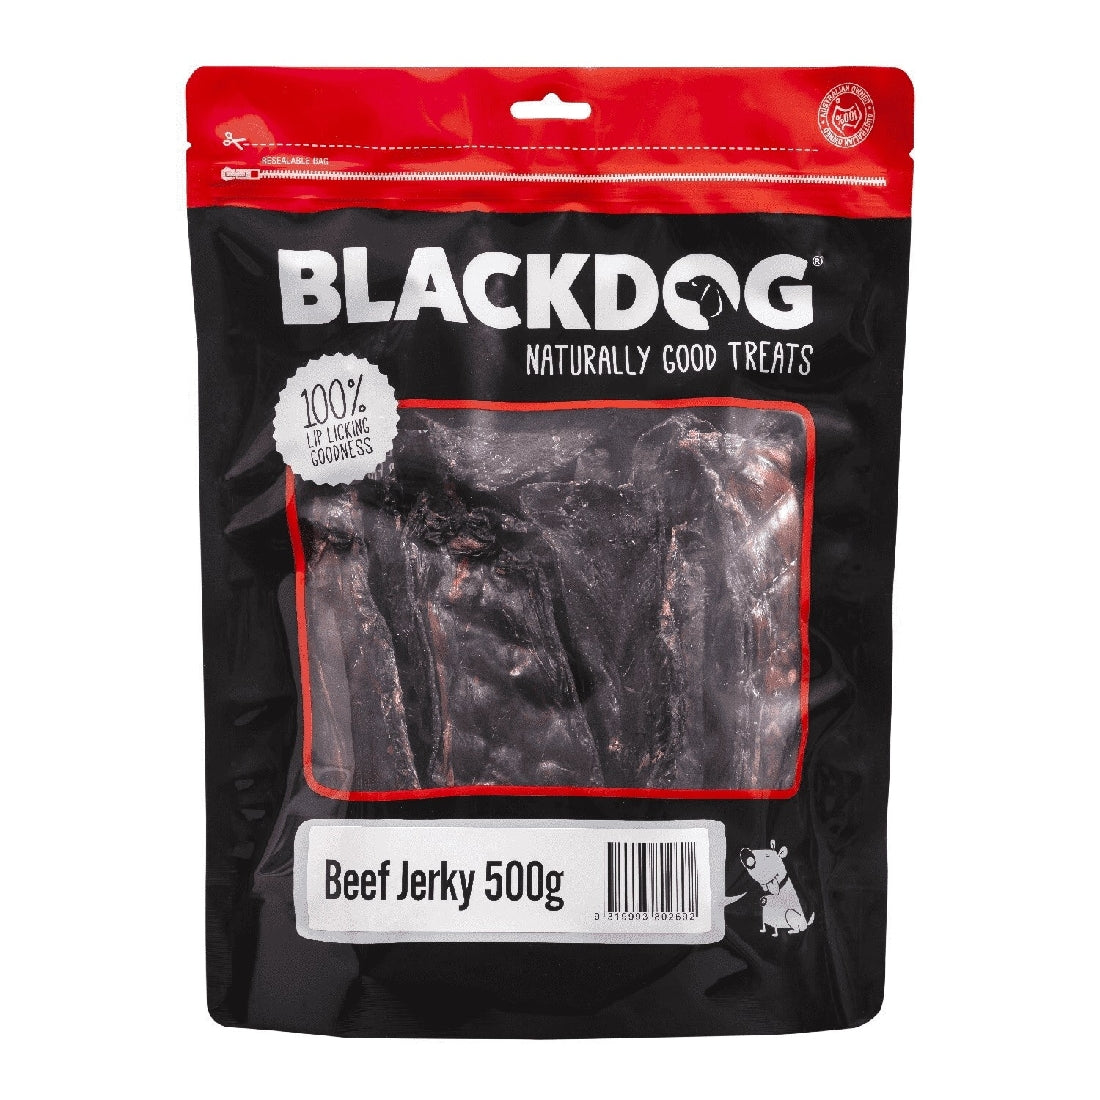 Blackdog brand Beef Jerky treats 500g package with clear window.